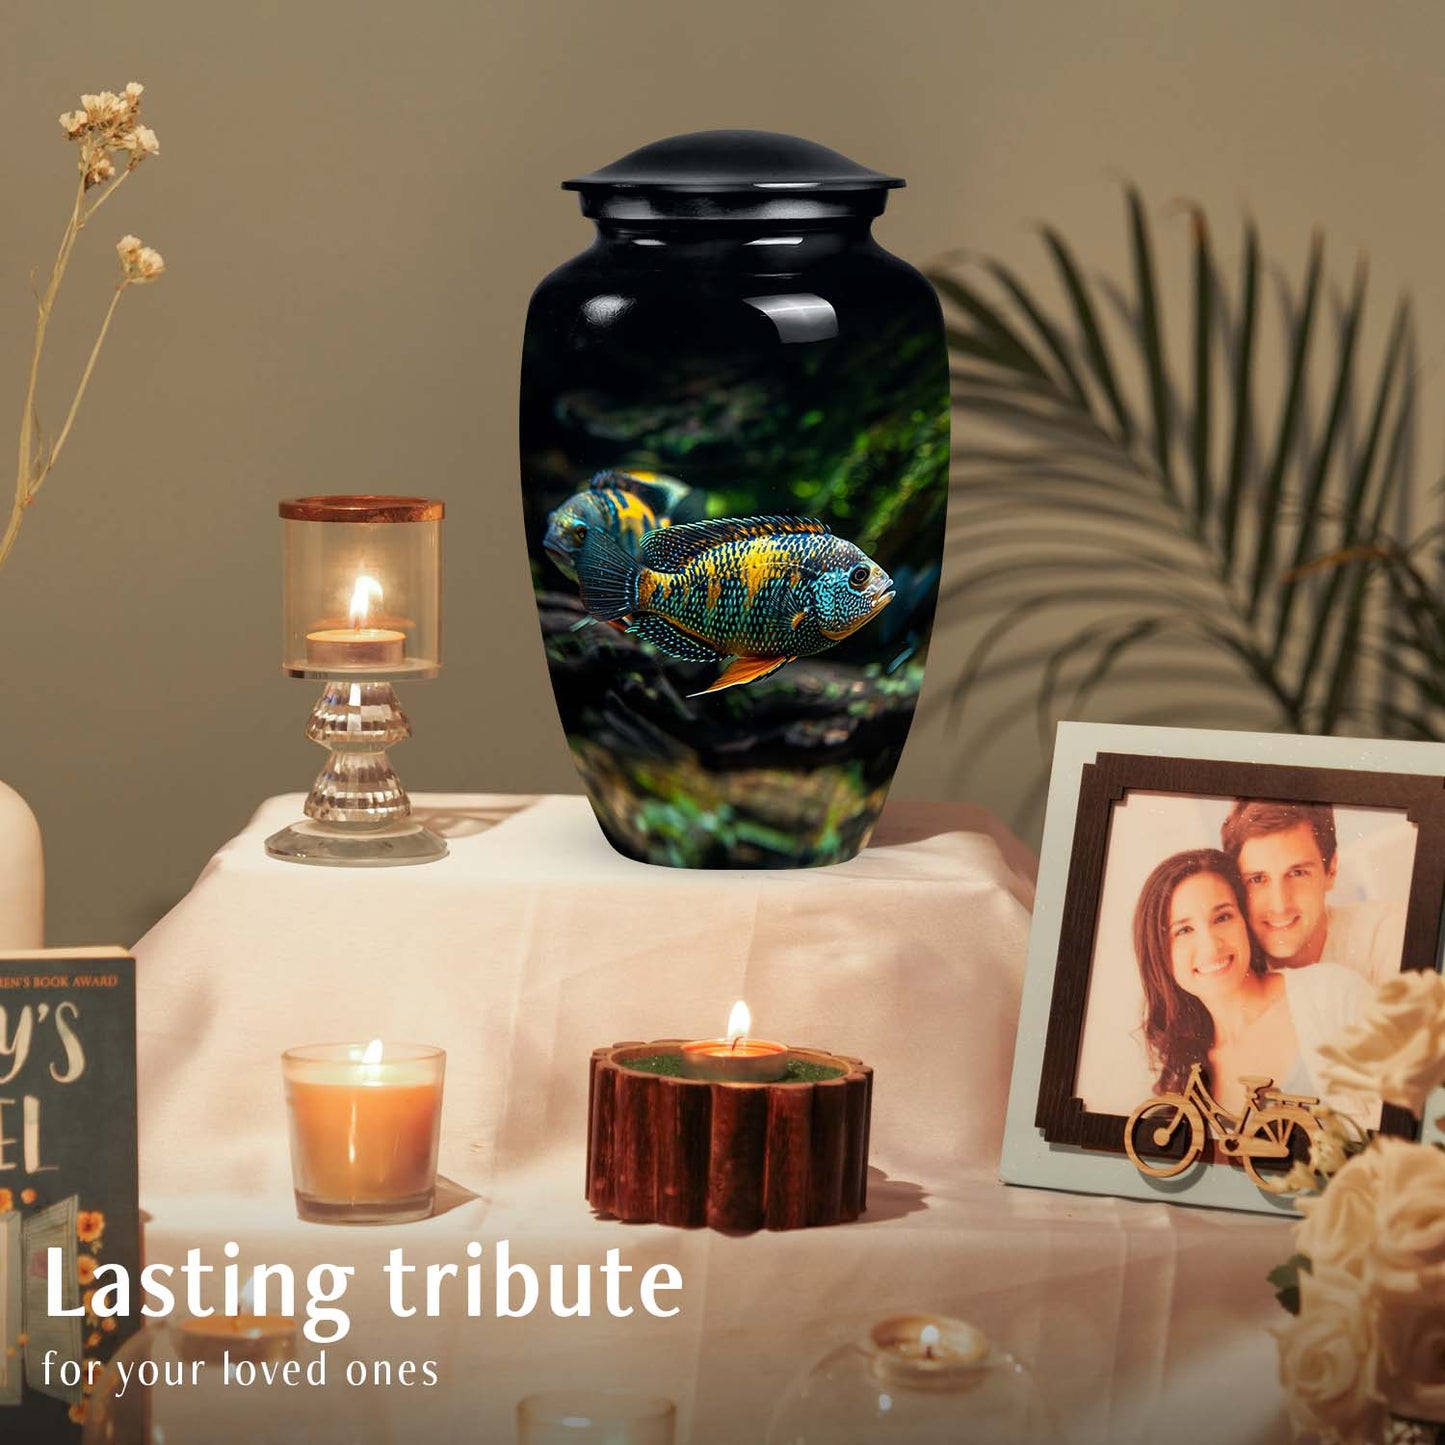 Large, unique fish design cremation urn, ideal for memorializing your loved ones